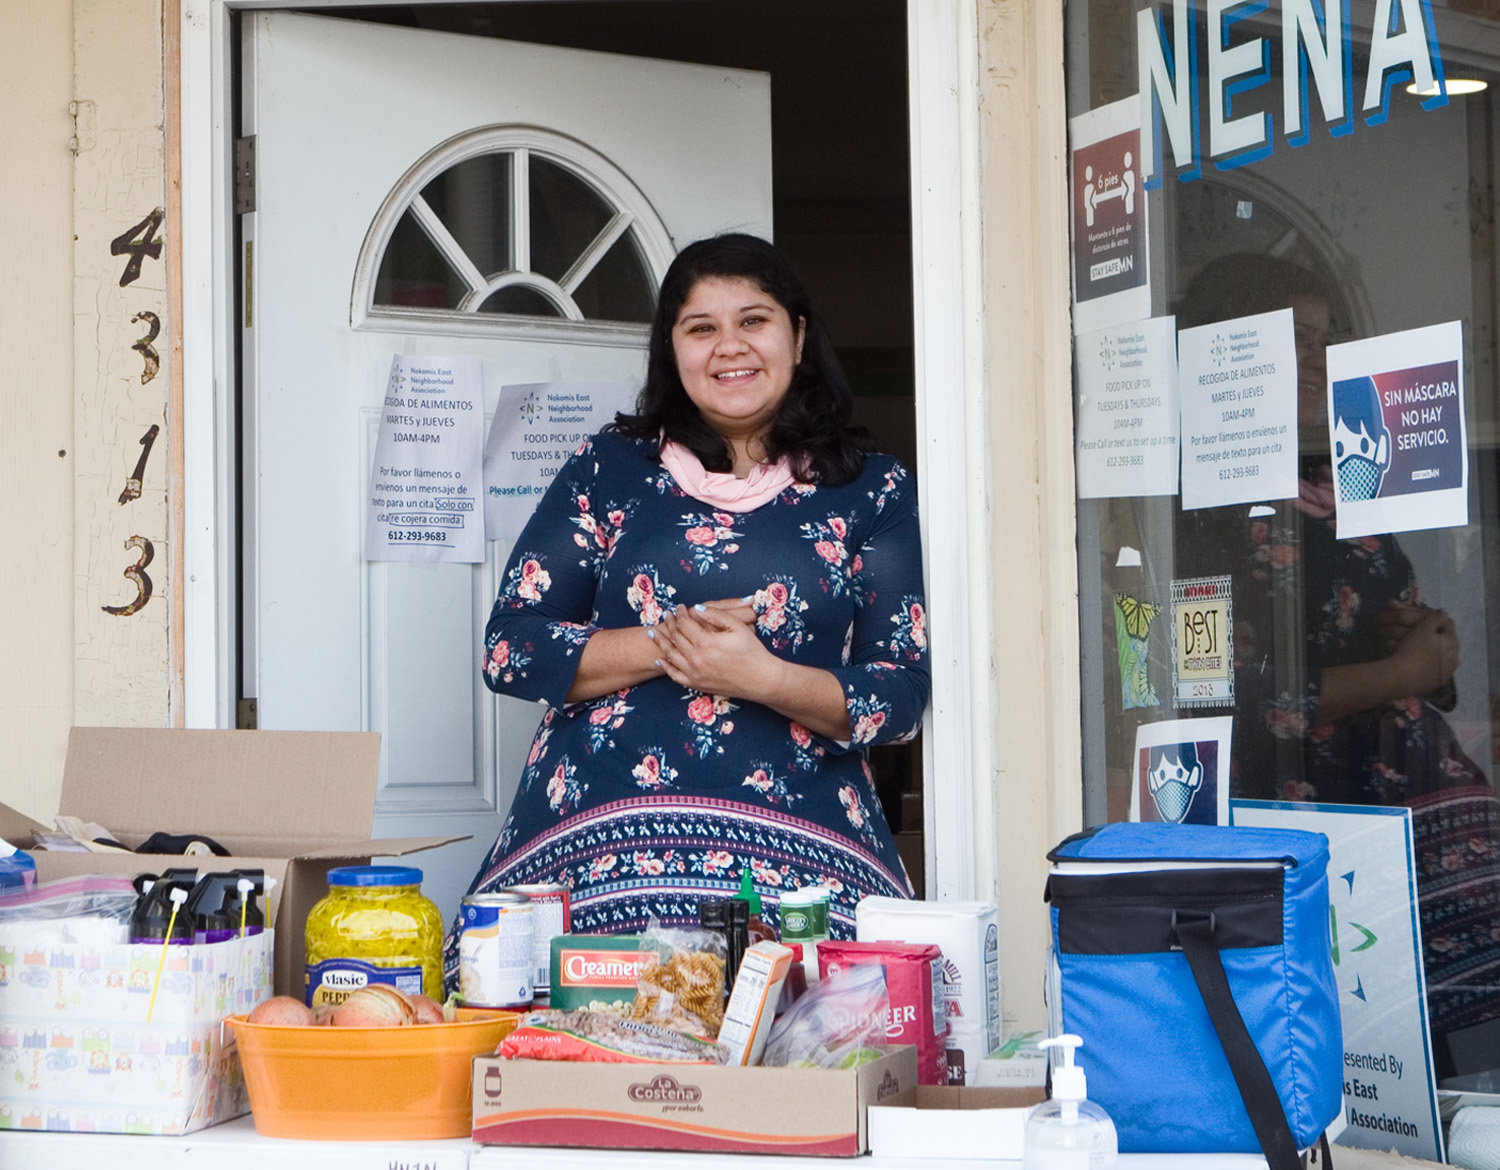 Karla Arredondo is NENA’s Community Organizer and oversees the food distribution, which takes place on Tuesdays and Thursdays from 10 a.m. to 4 p.m. Call or text 612.293.9683 to schedule an appointment at least 24 hours before you plan to come; both English and Spanish are spoken. (Photo by Margie O’Loughlin)